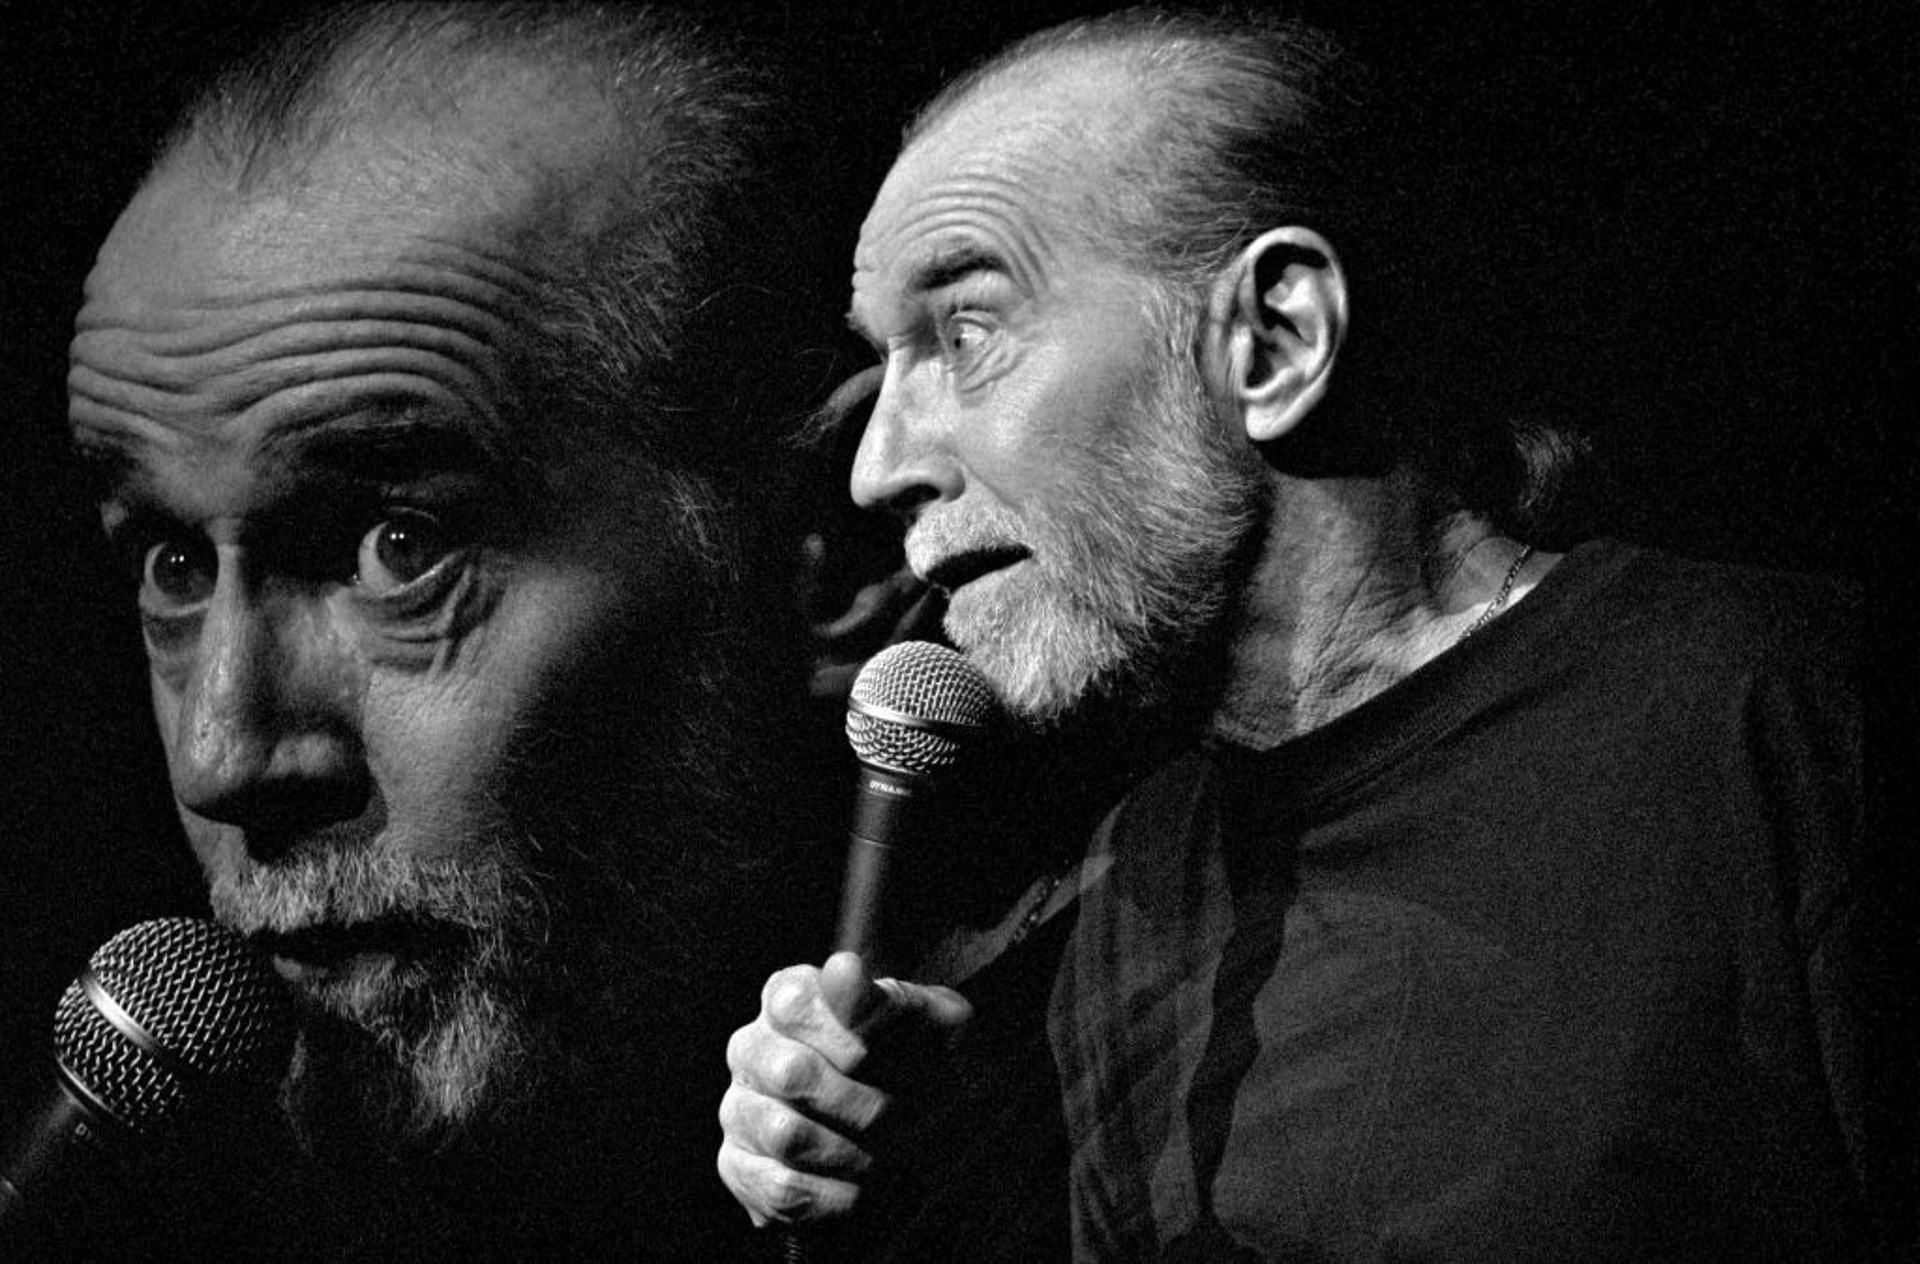 George Carlin in 1992 (Image via Mark Junge/Getty Images)